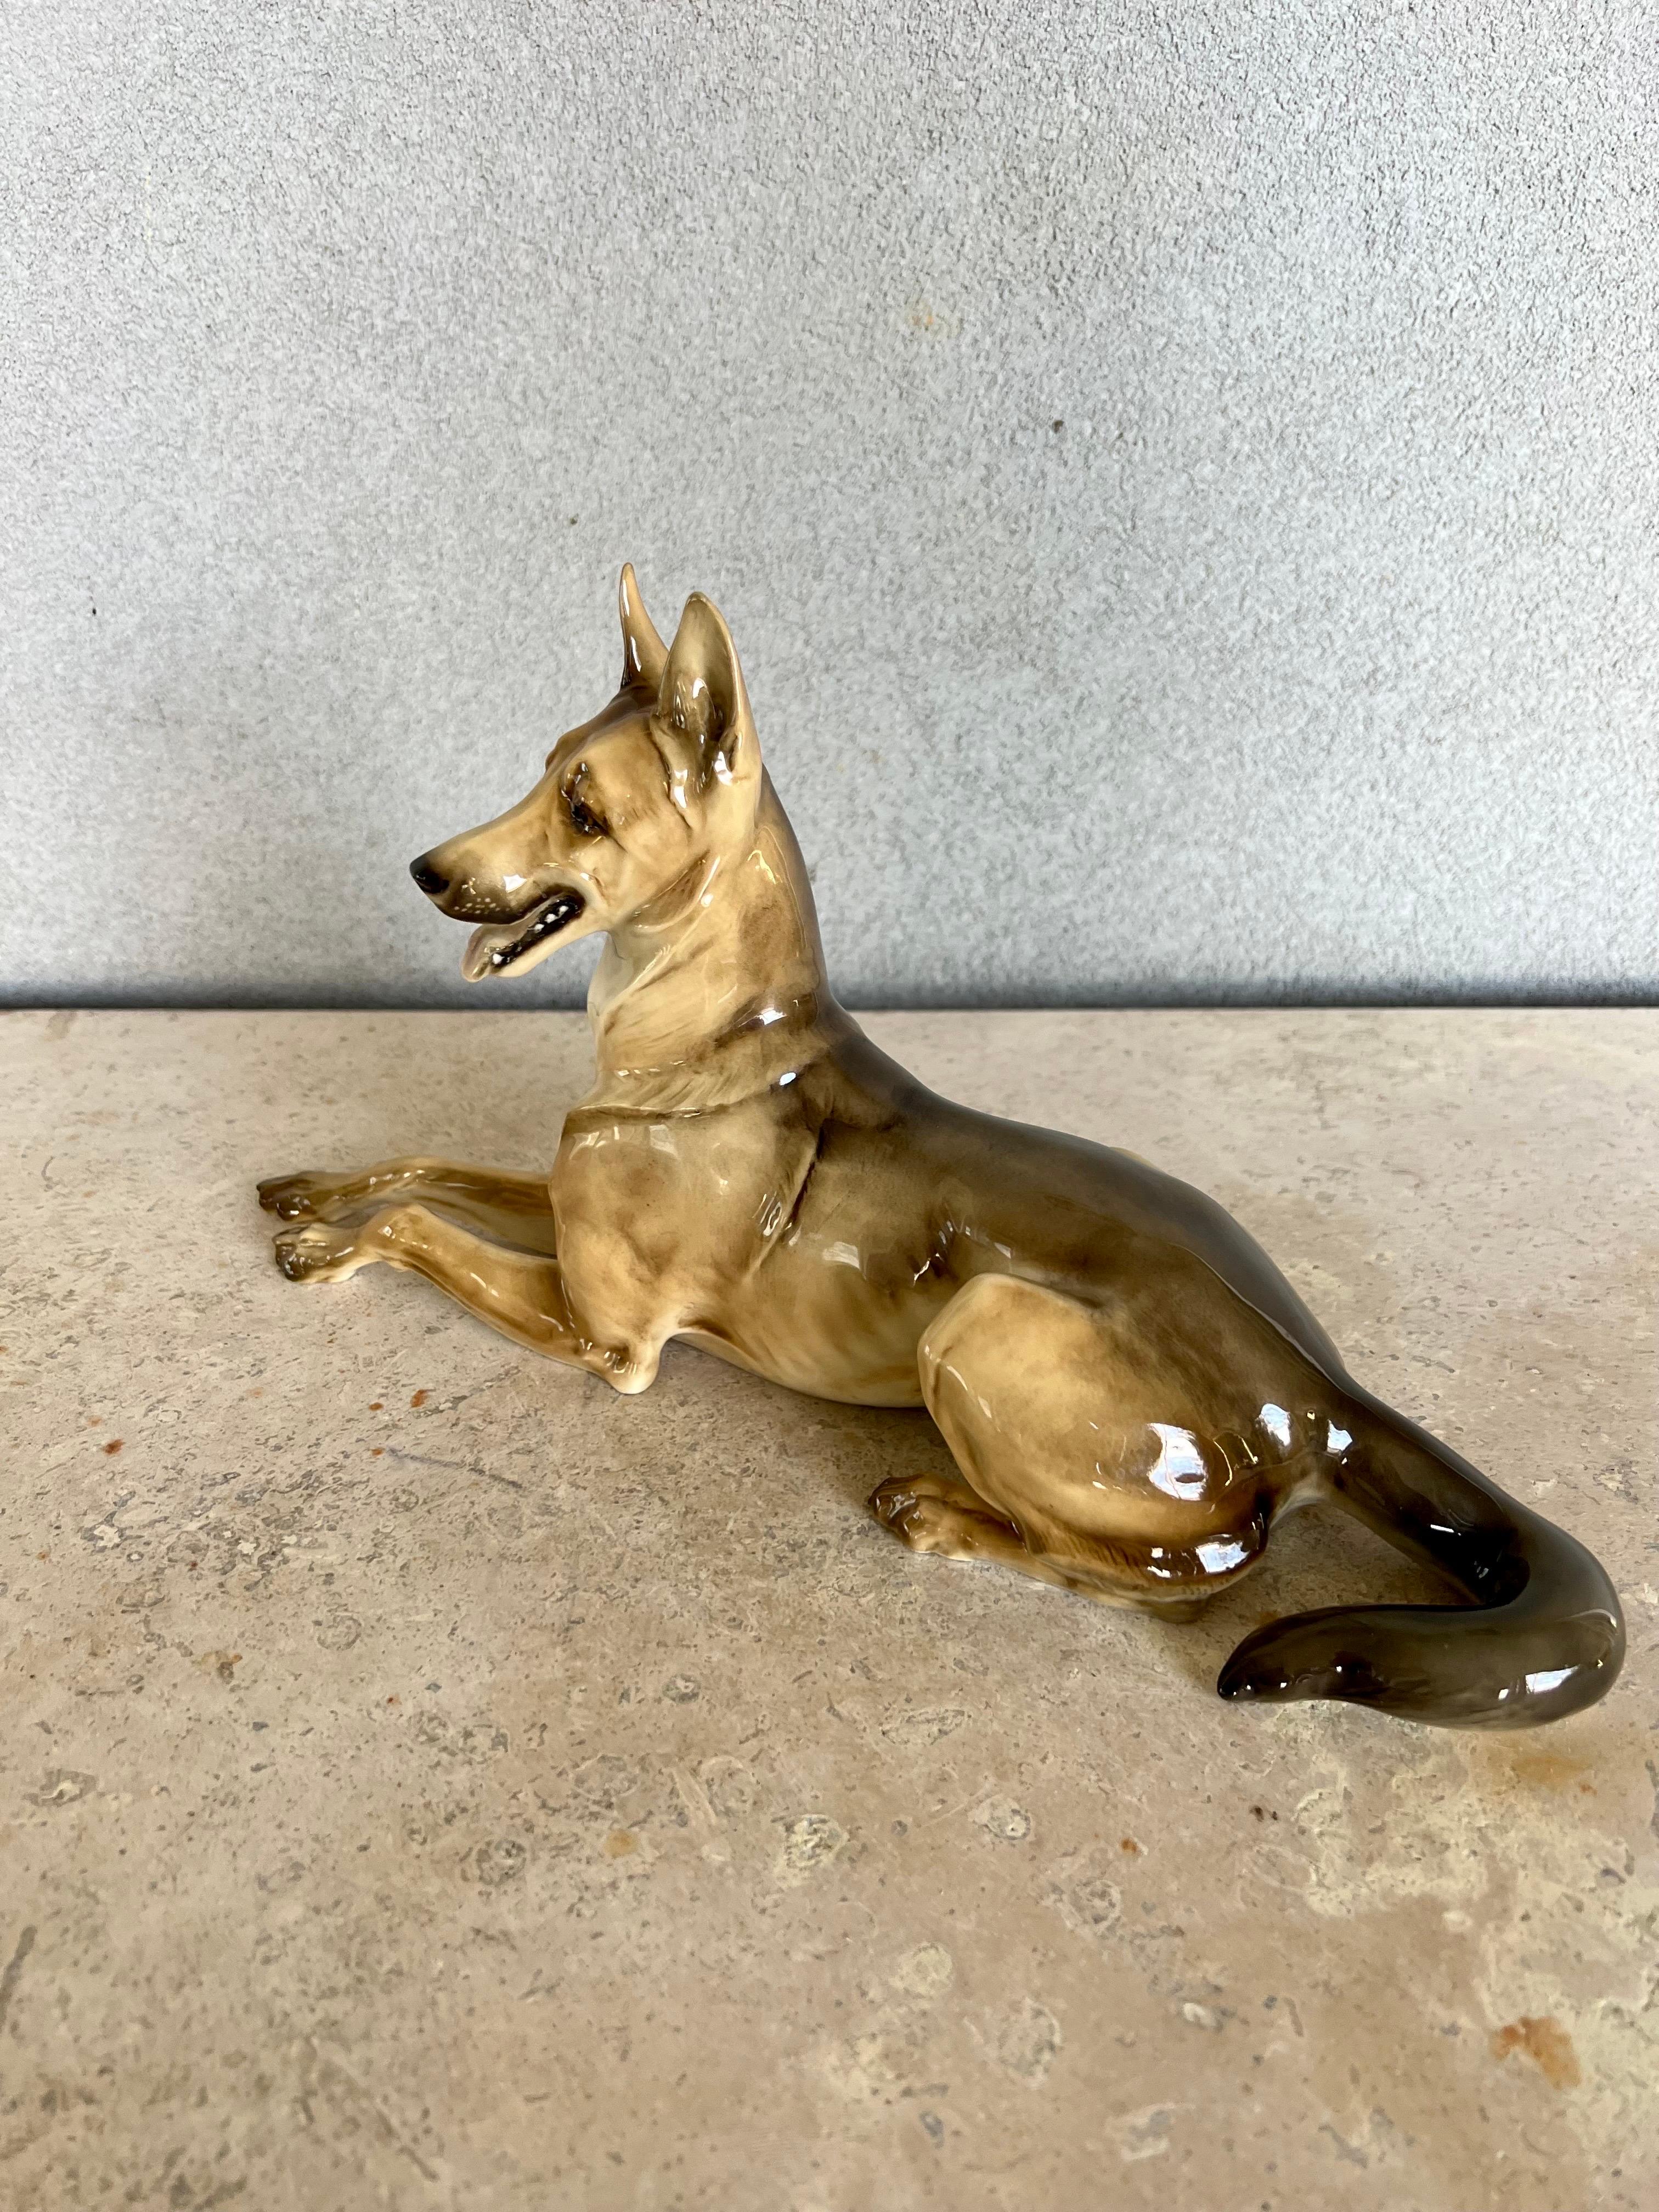 Exquisite porcelain German Shepherd Dog, hand-Painted, very detailed. 
has a glazed finished that gives the dog a very beautiful and sharp look.
Has manufacturer stamp on bottom.